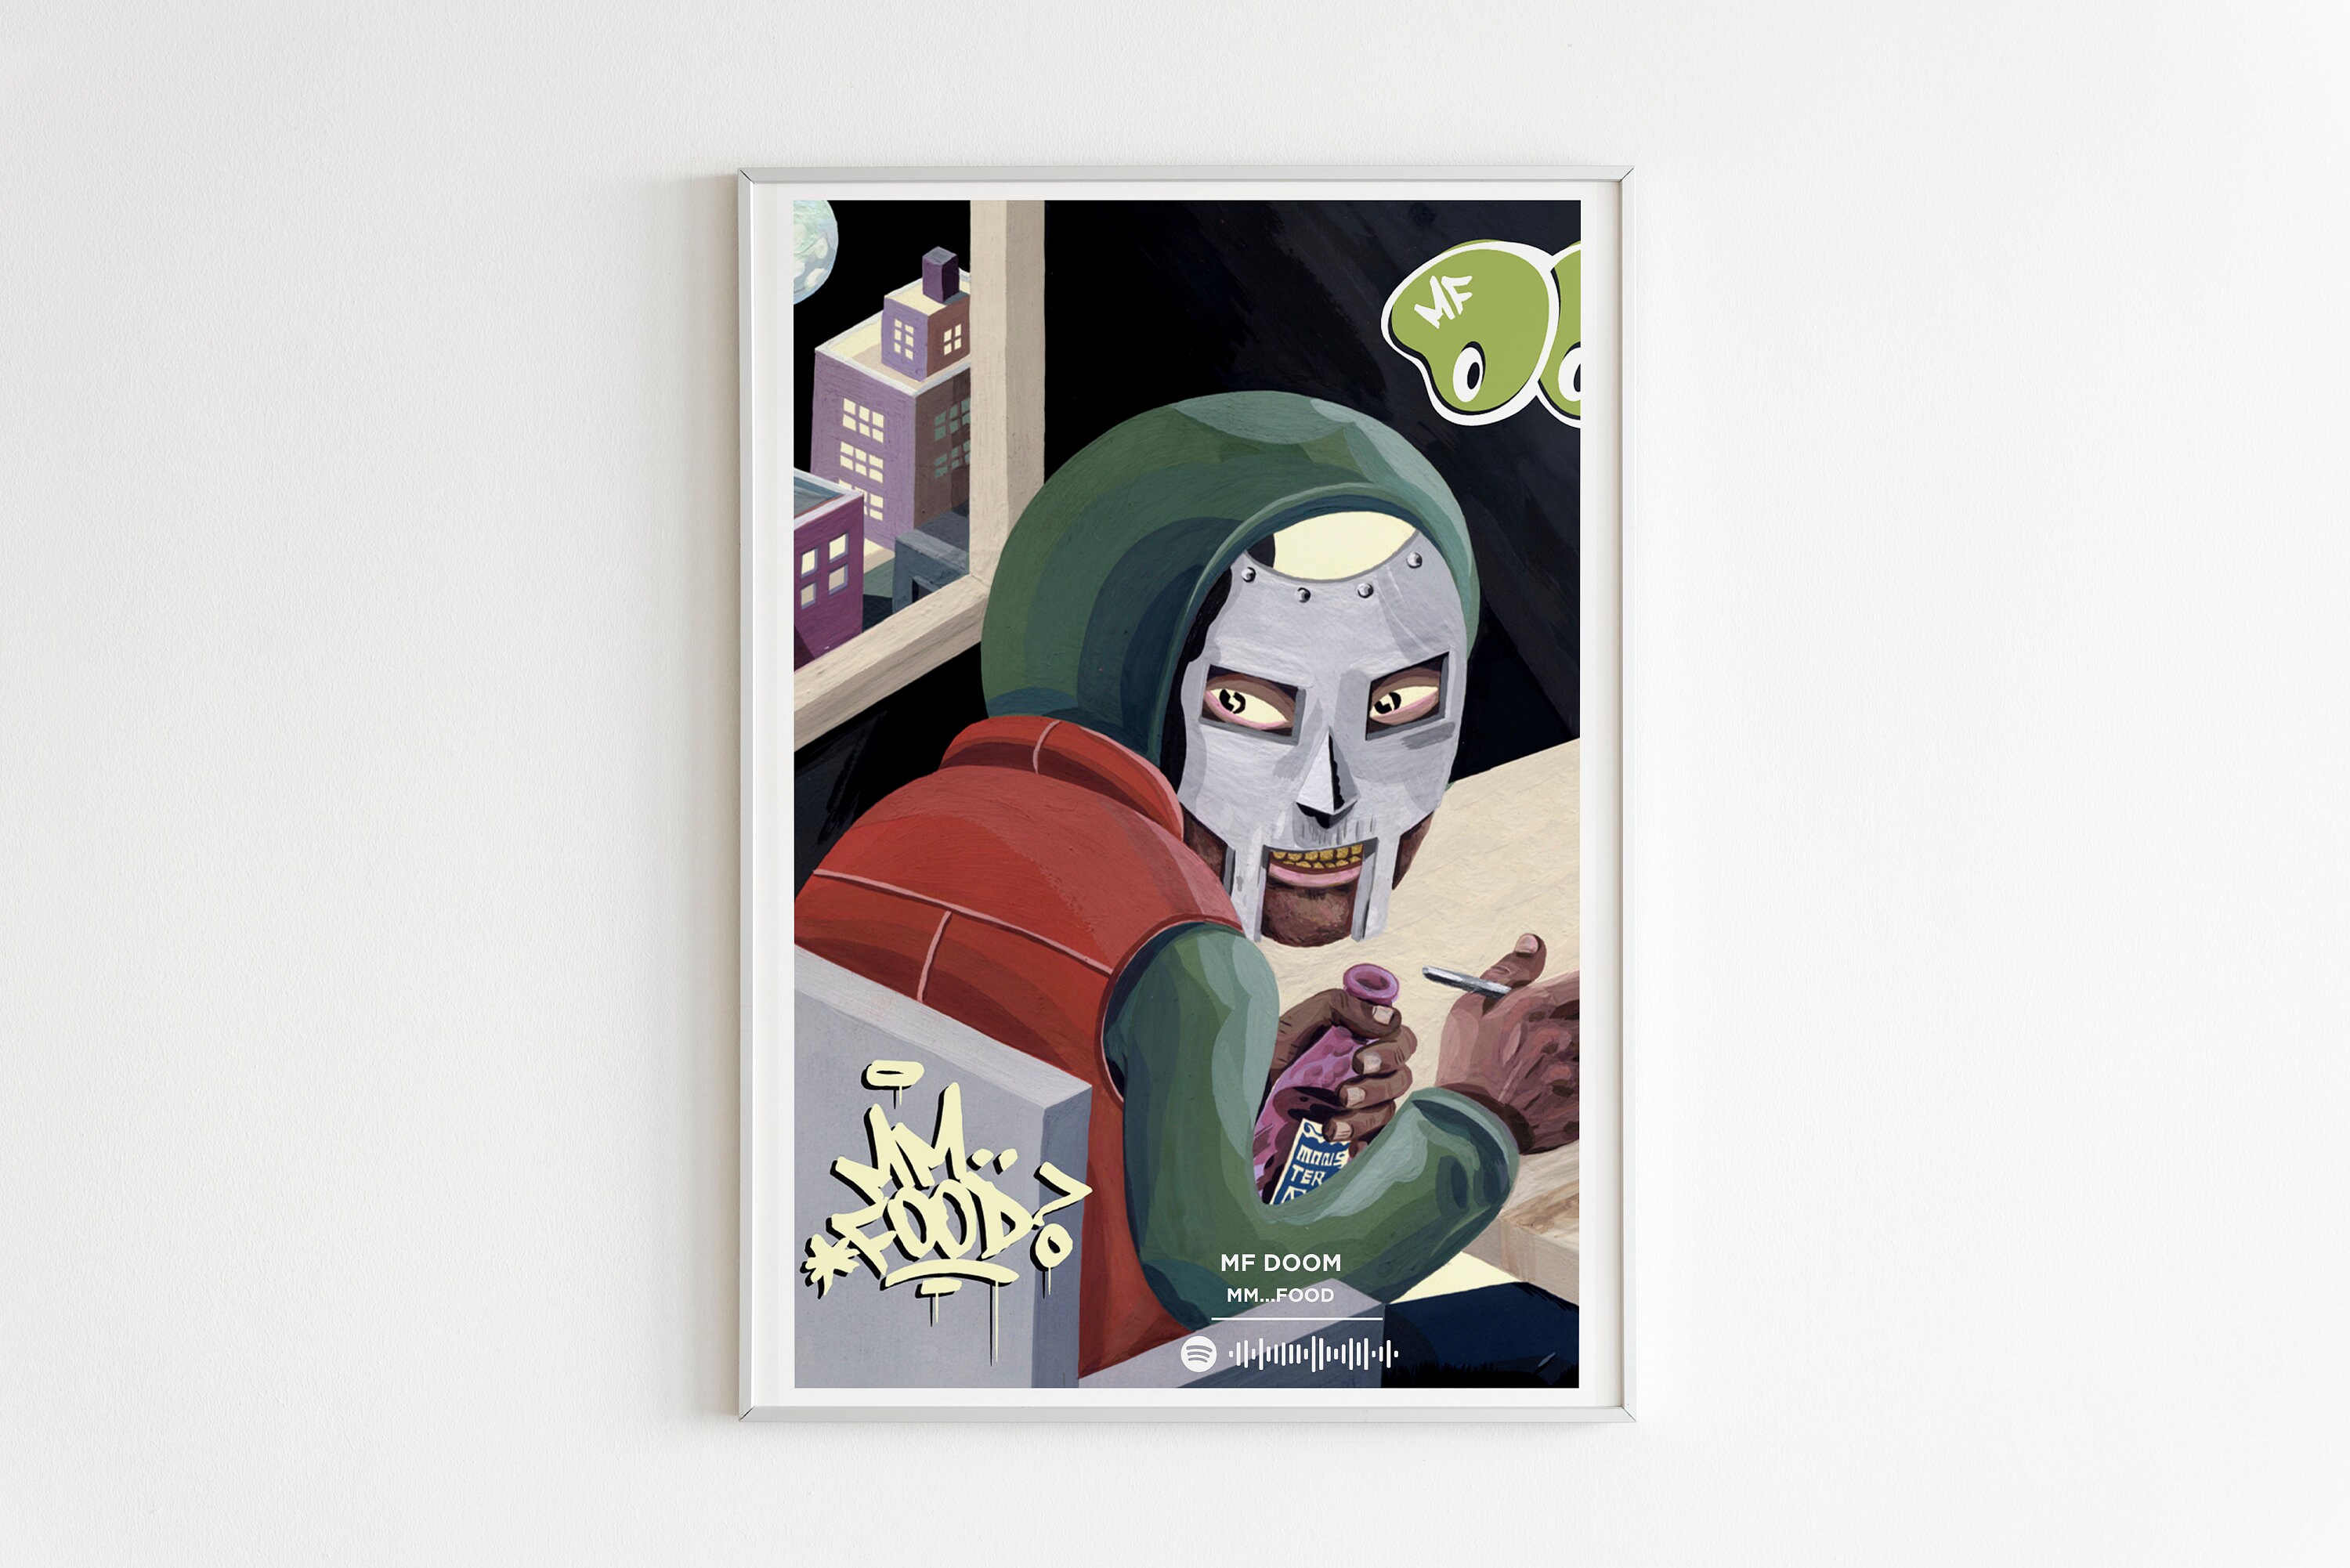 Amazoncom wsxvfr MF Doom Mm Food Album Cover Cool Rapper Hip Hop Poster  Poster Canvas Wall Art Painting Aesthetic Home Wall Decor Artwork  gifts16x24inch40x60cm 16x24inch40x60cm Posters  Prints